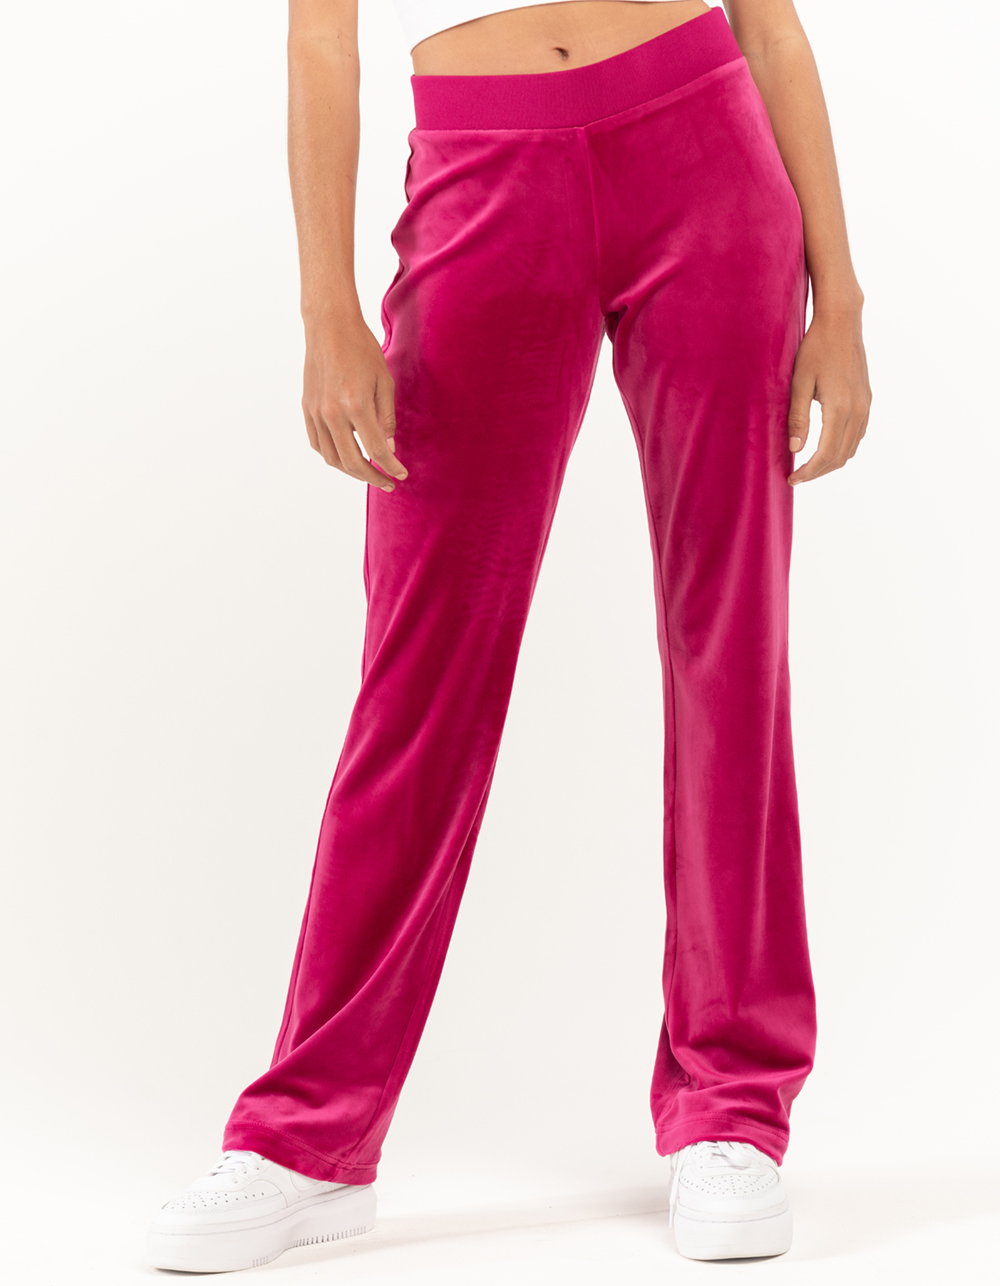 JUICY COUTURE OG Bling Womens Pants - RASPBERRY | Tillys